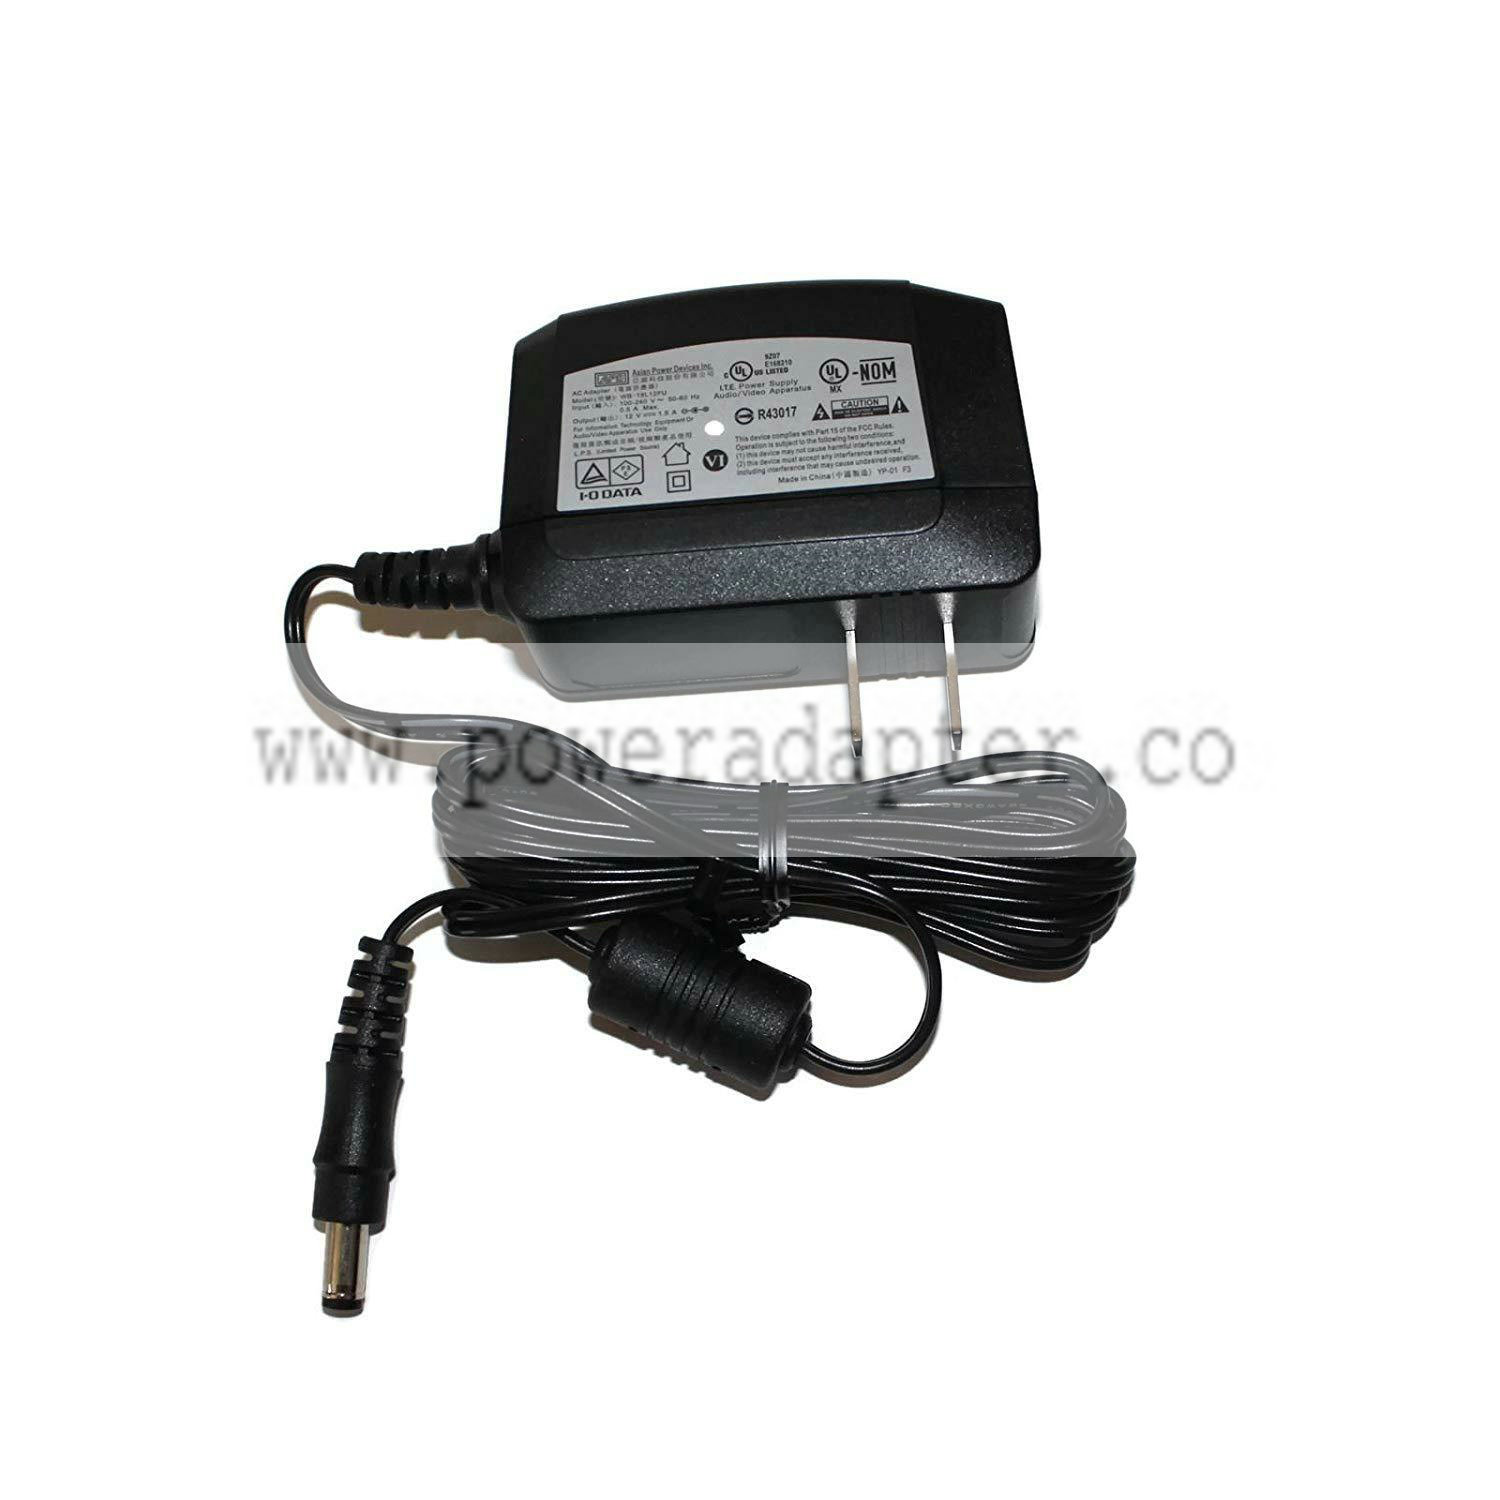 APD AC Adapter 12V 1.5A 120-240V 50-60Hz for WD / Seagate HDD - WB-18L12FU Model: WB-18L12FU Output Voltage: 12 V T